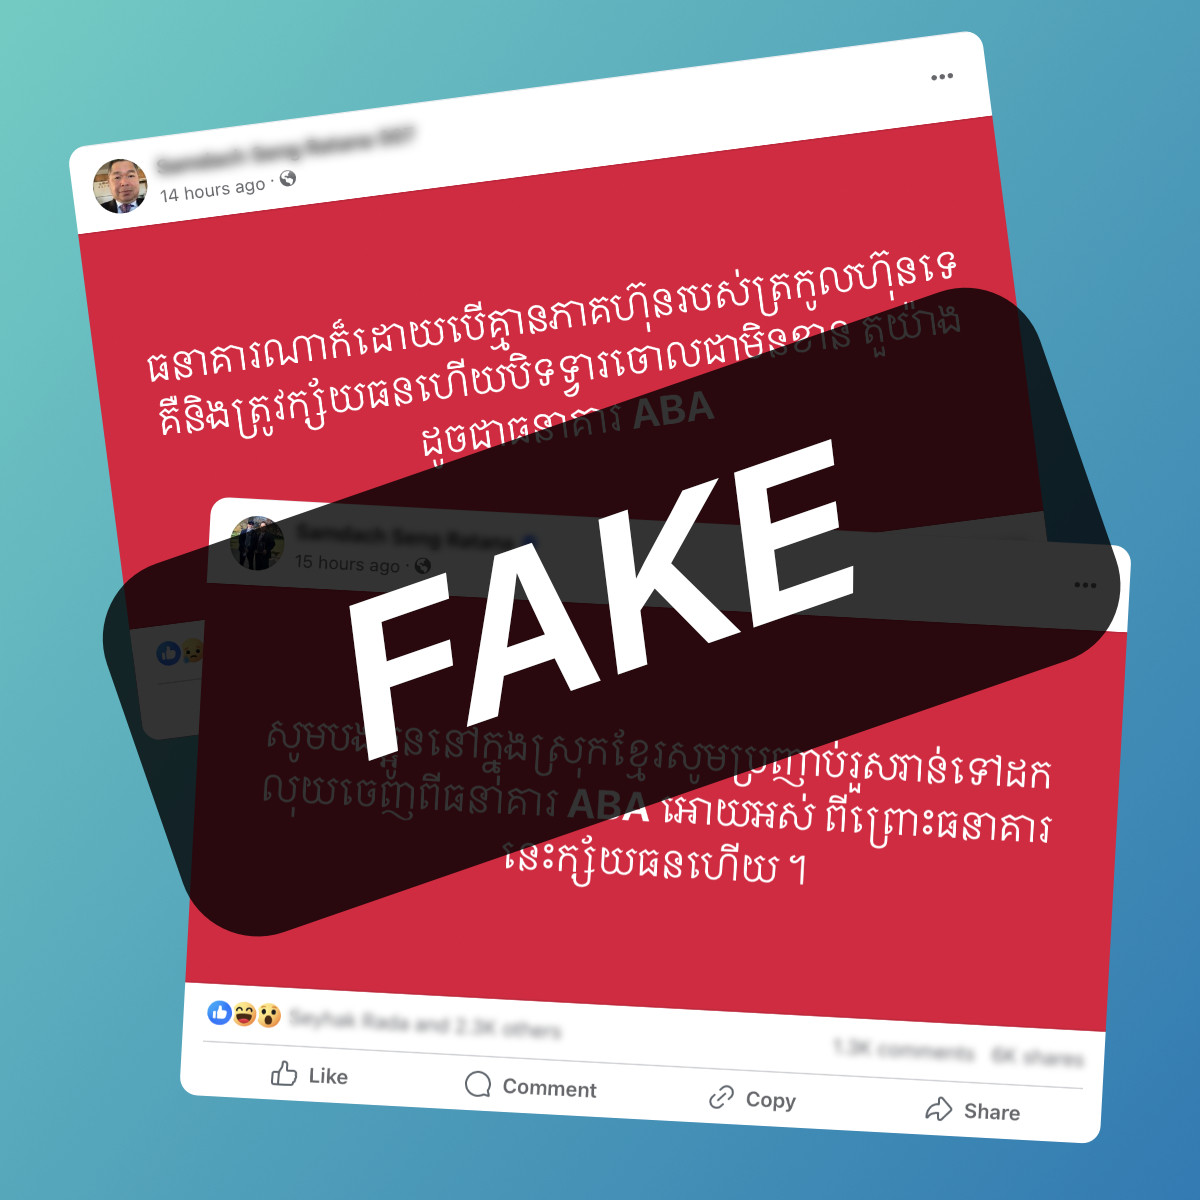 Public Announcement on fake information about ABA Bank on social media